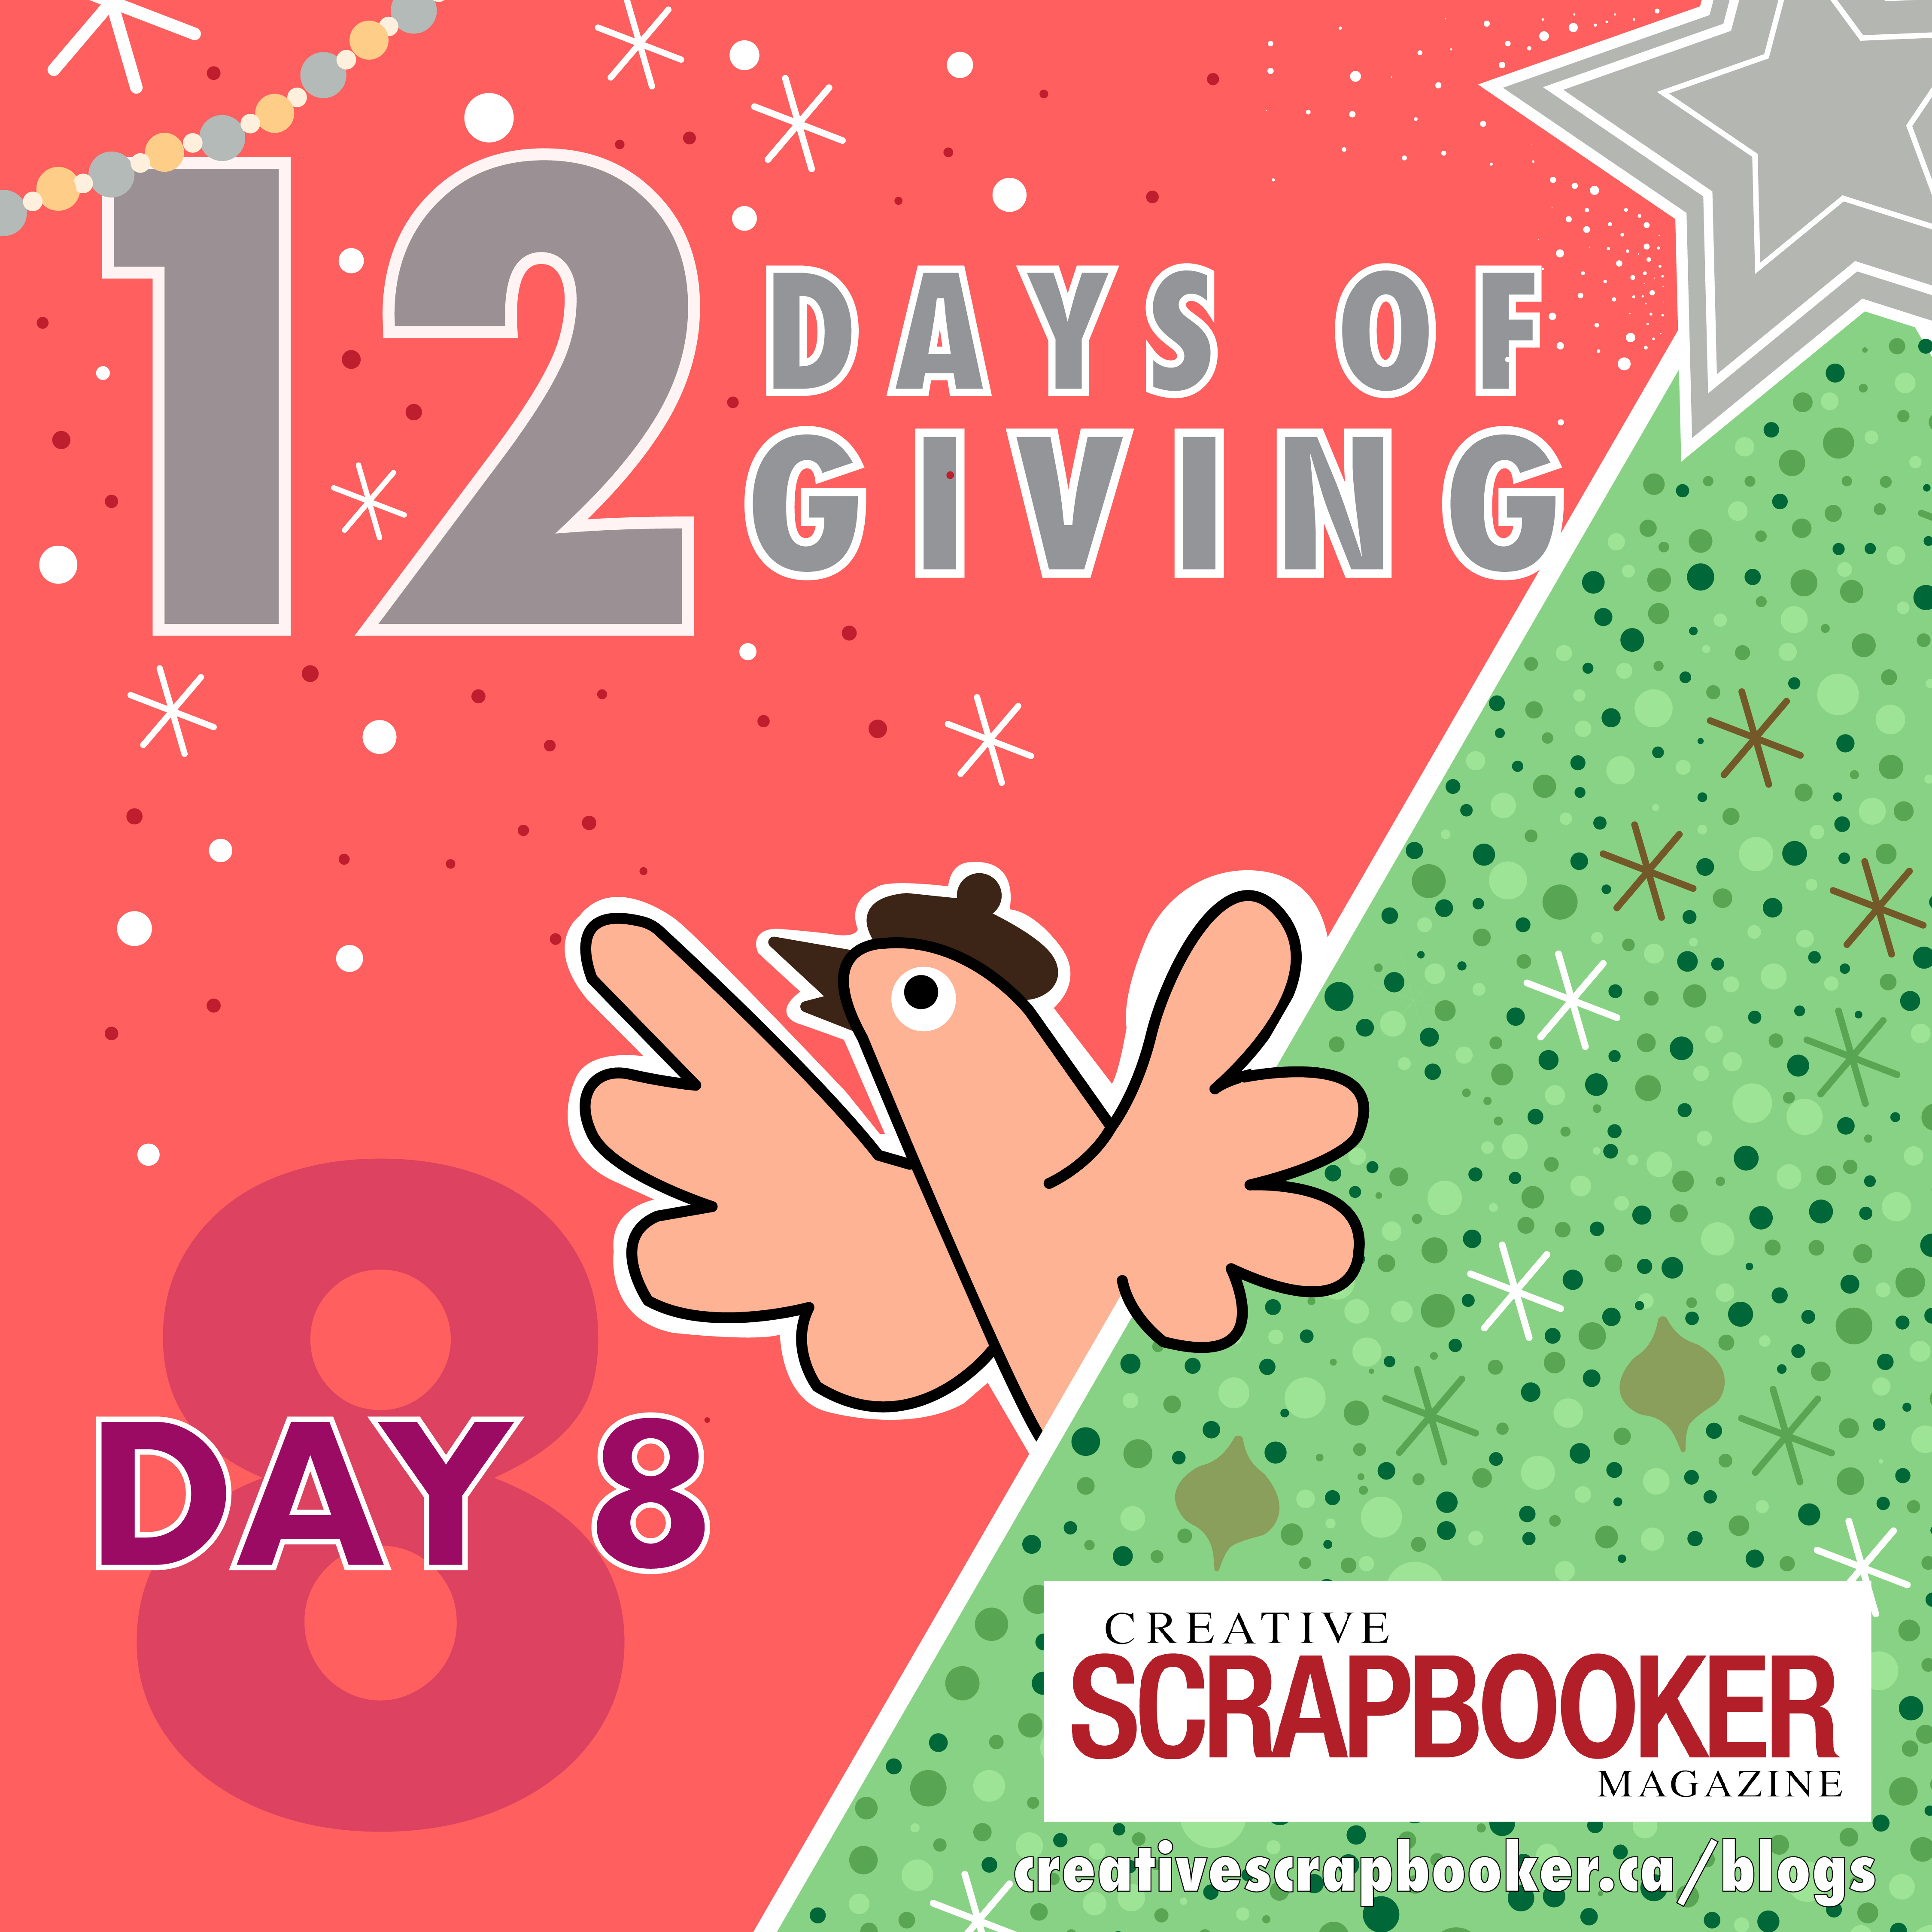 Day 8 of 12 Days of Giving | Creative Scrapbooker Magazine